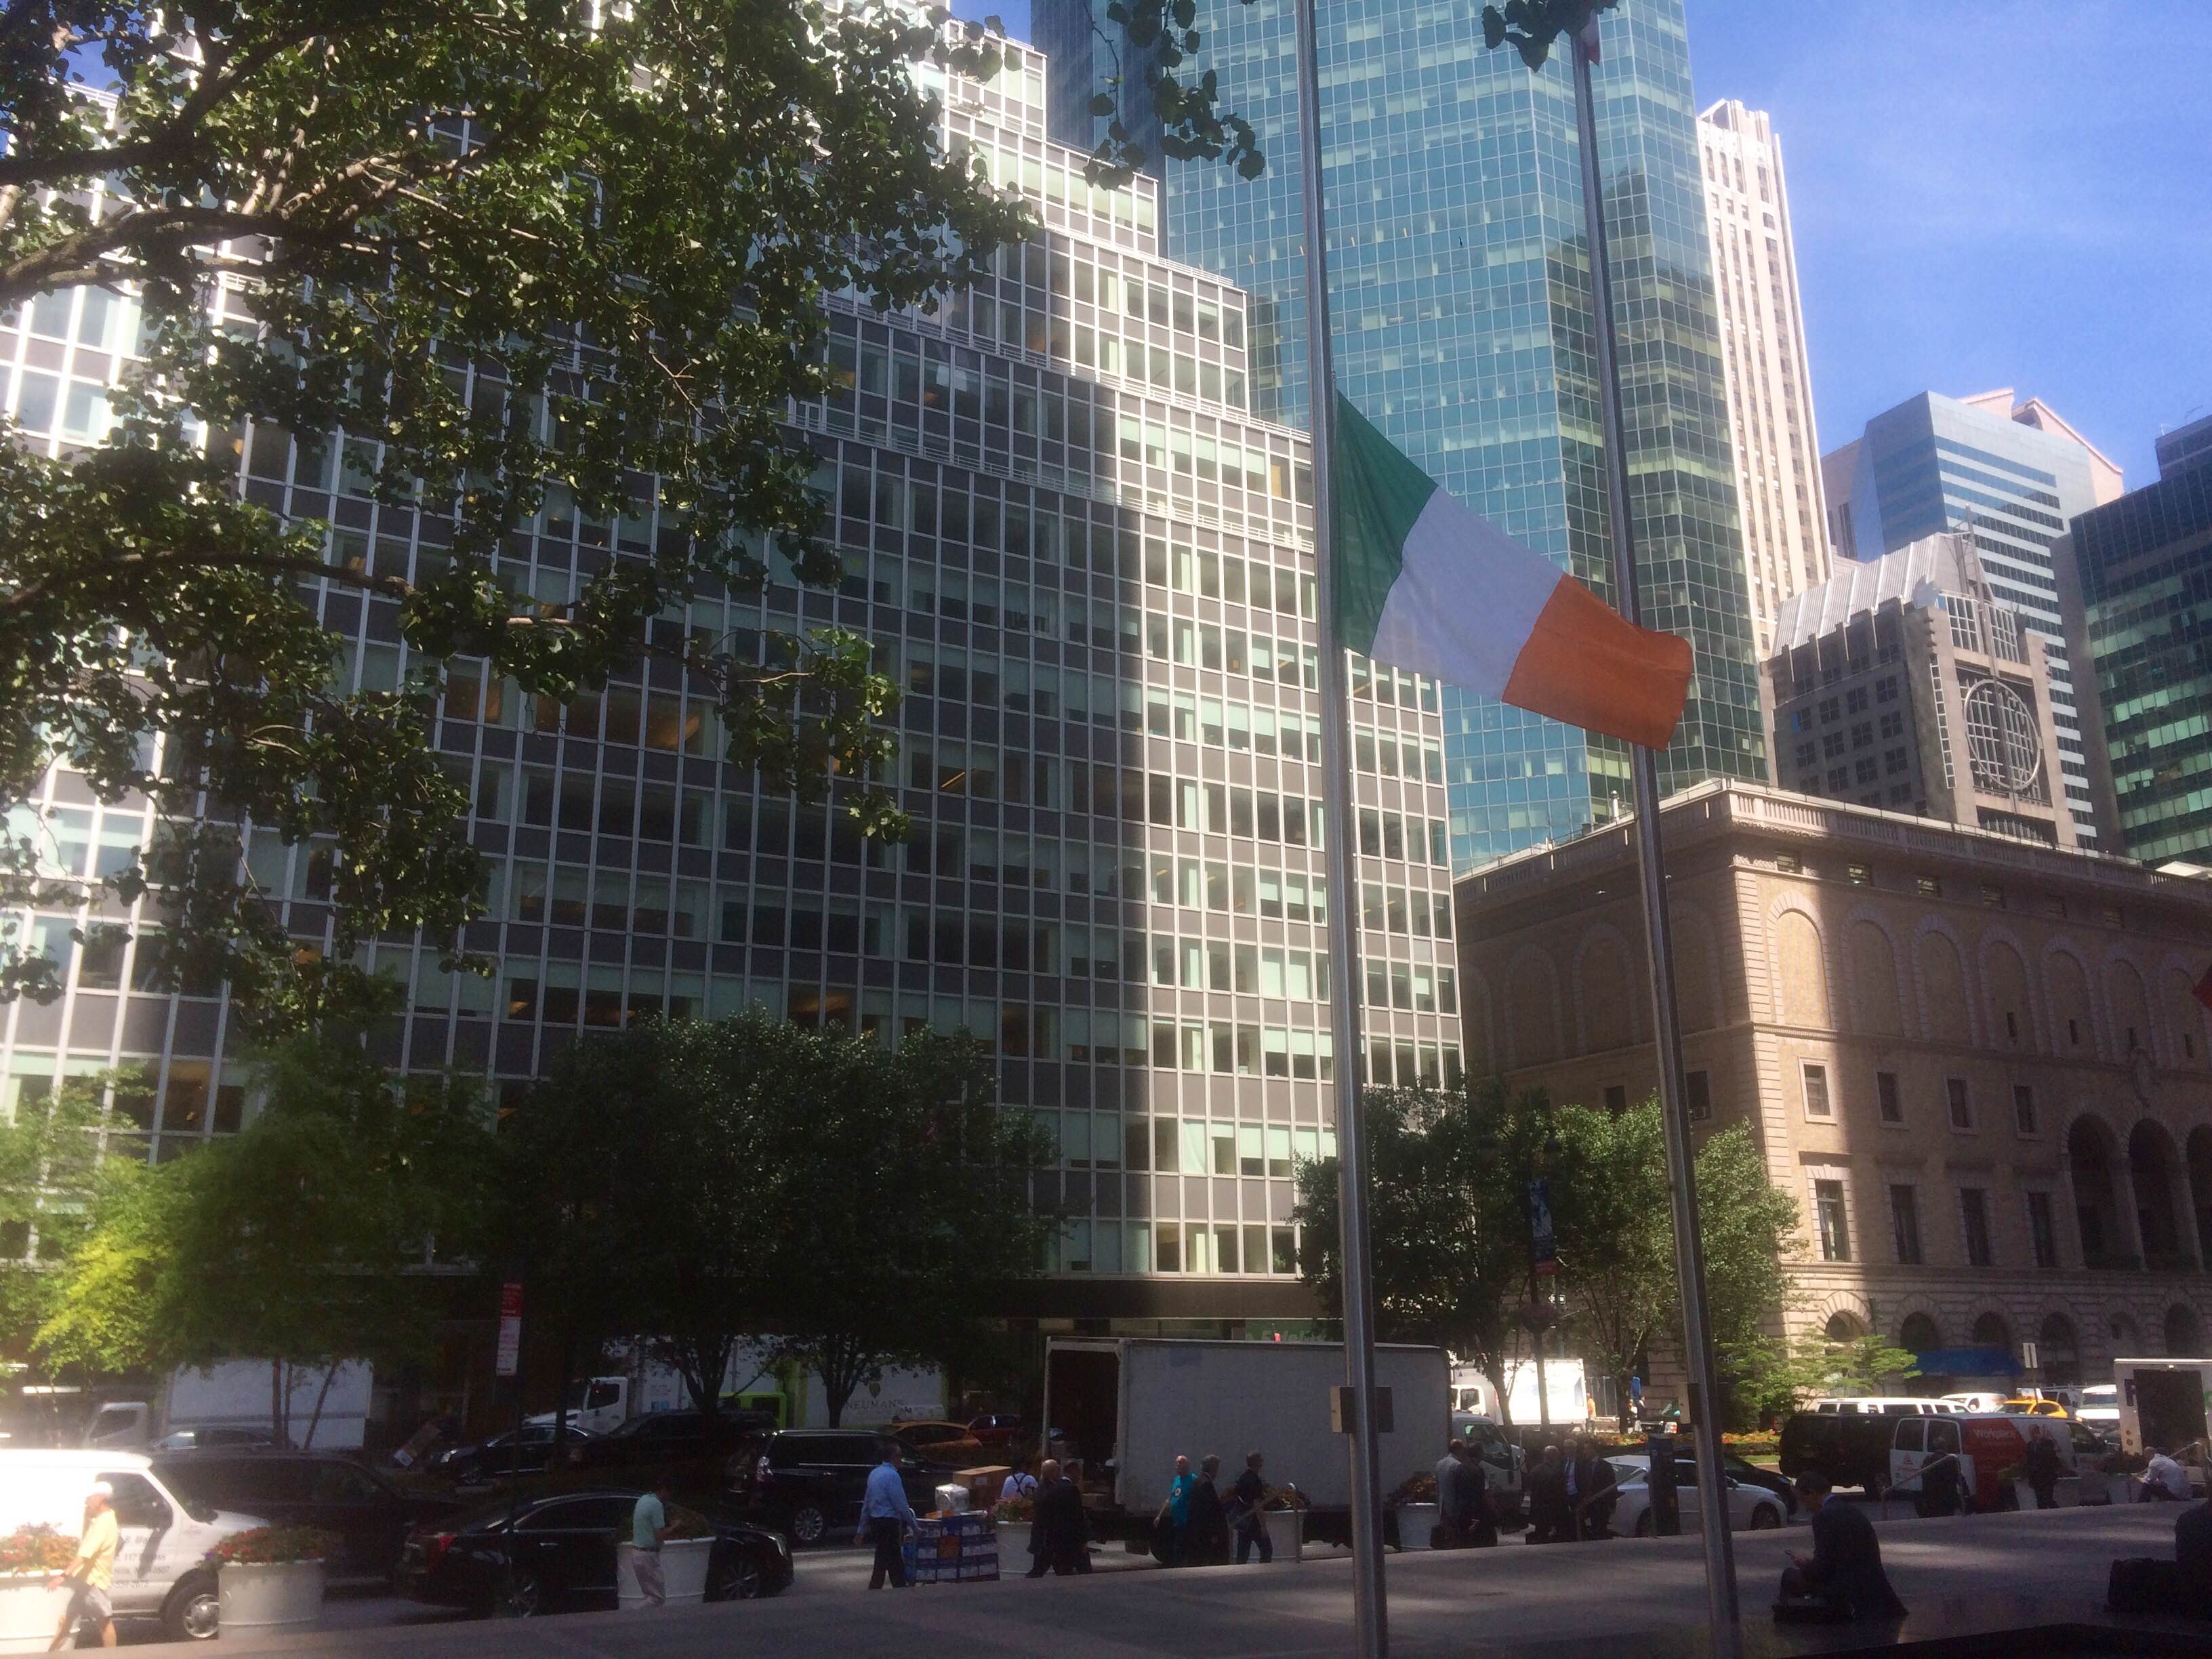 The Irish flag at half mast outside the Consul General of Ireland in New York City.